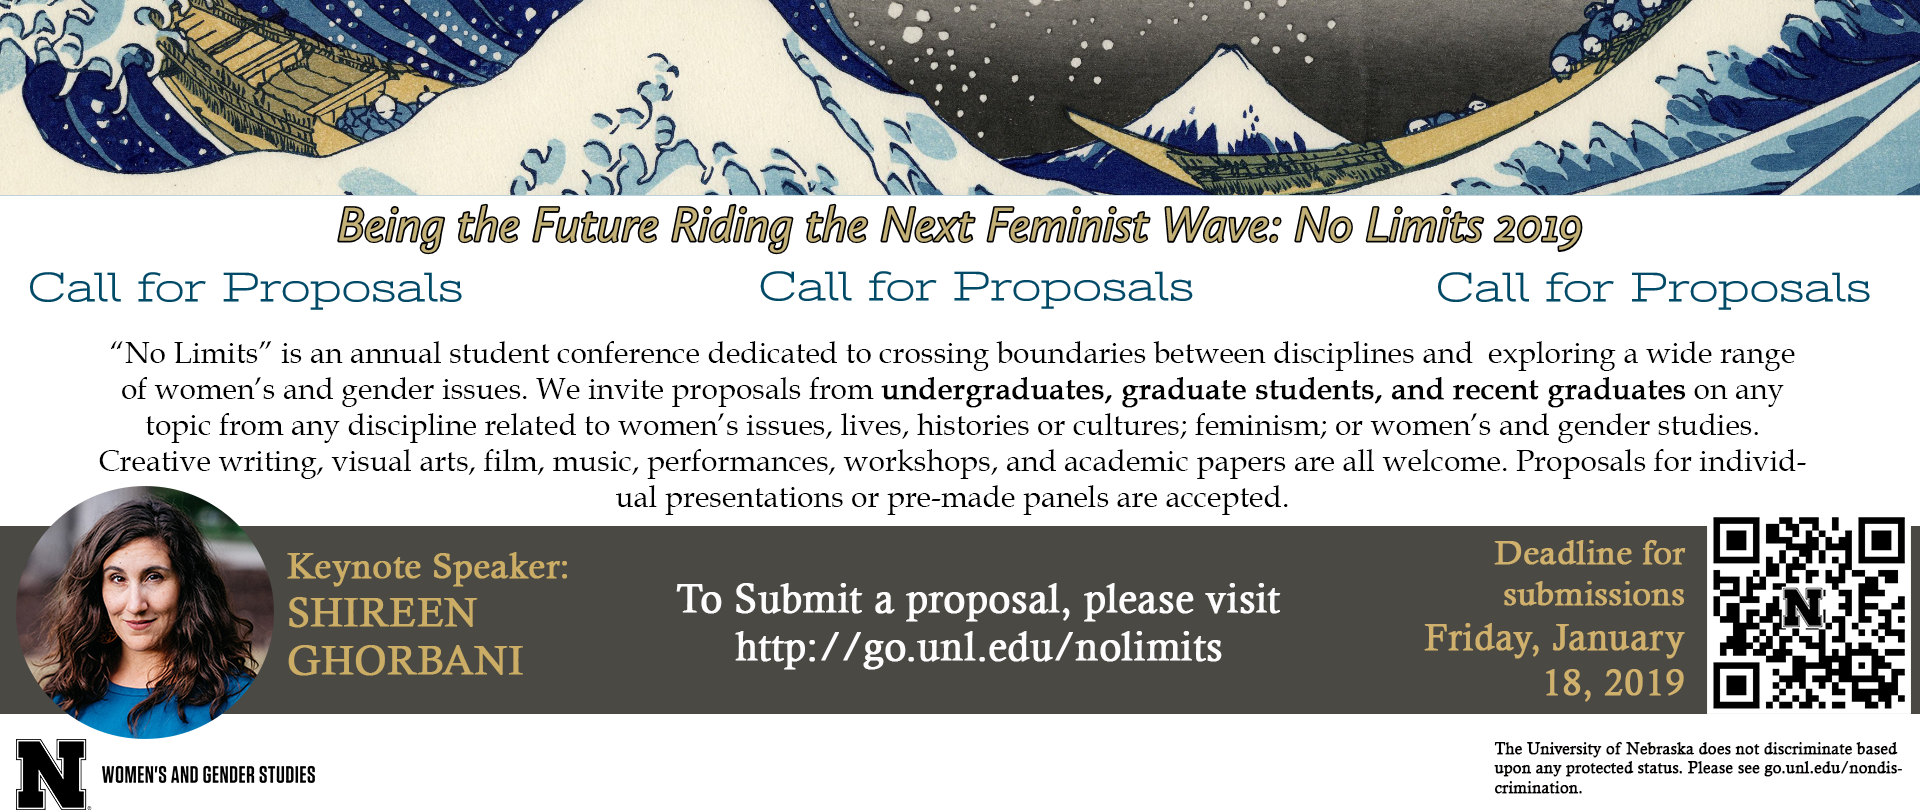 Photo Credit: Women's and Gender Studies No Limits 2019 conference Call for Proposals